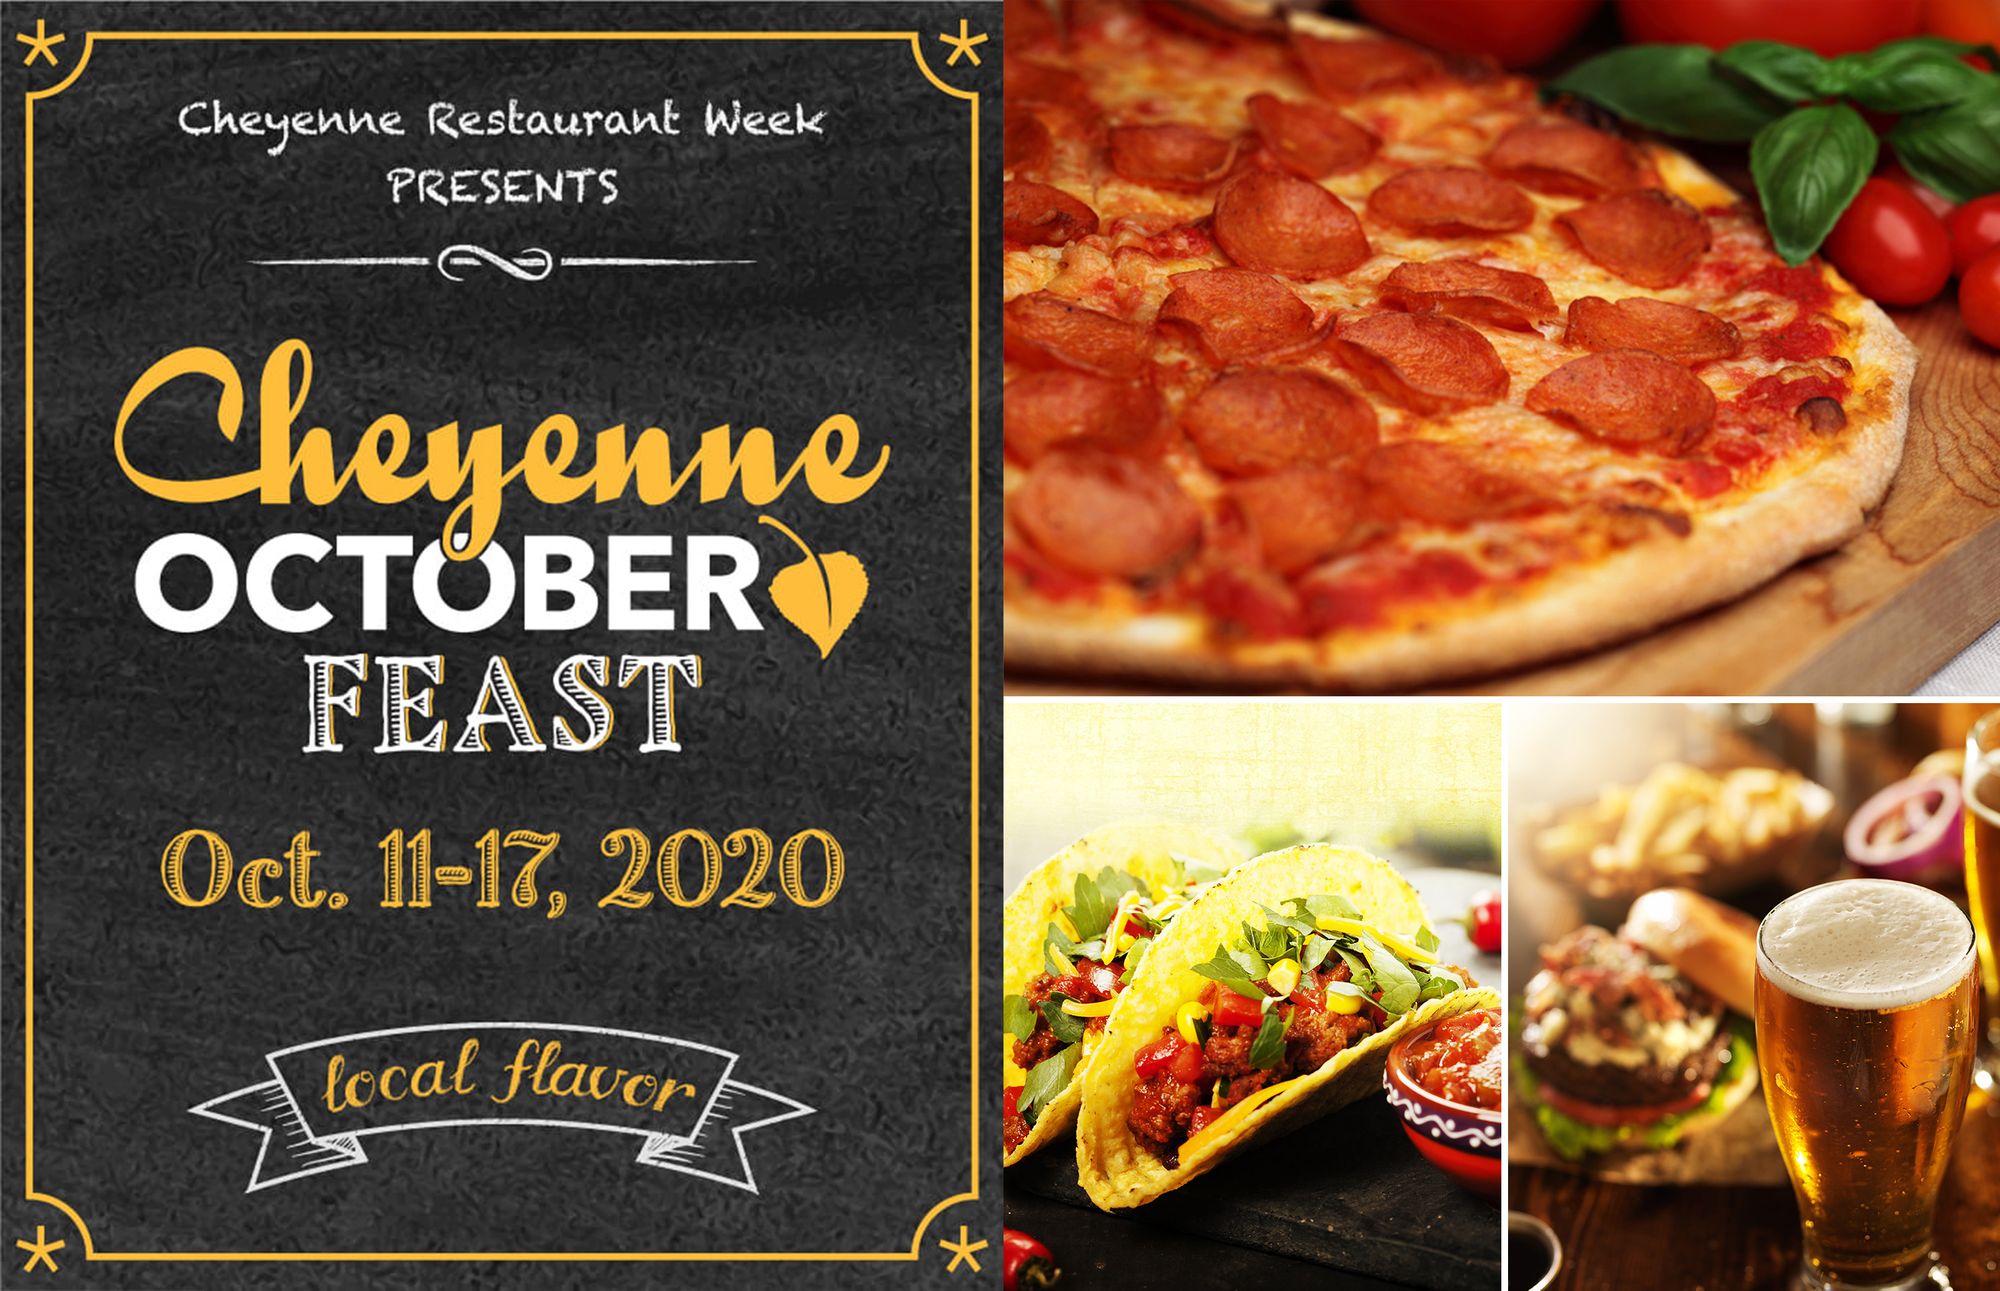 Cheyenne October Feast Is Underway - Don't Miss Out!